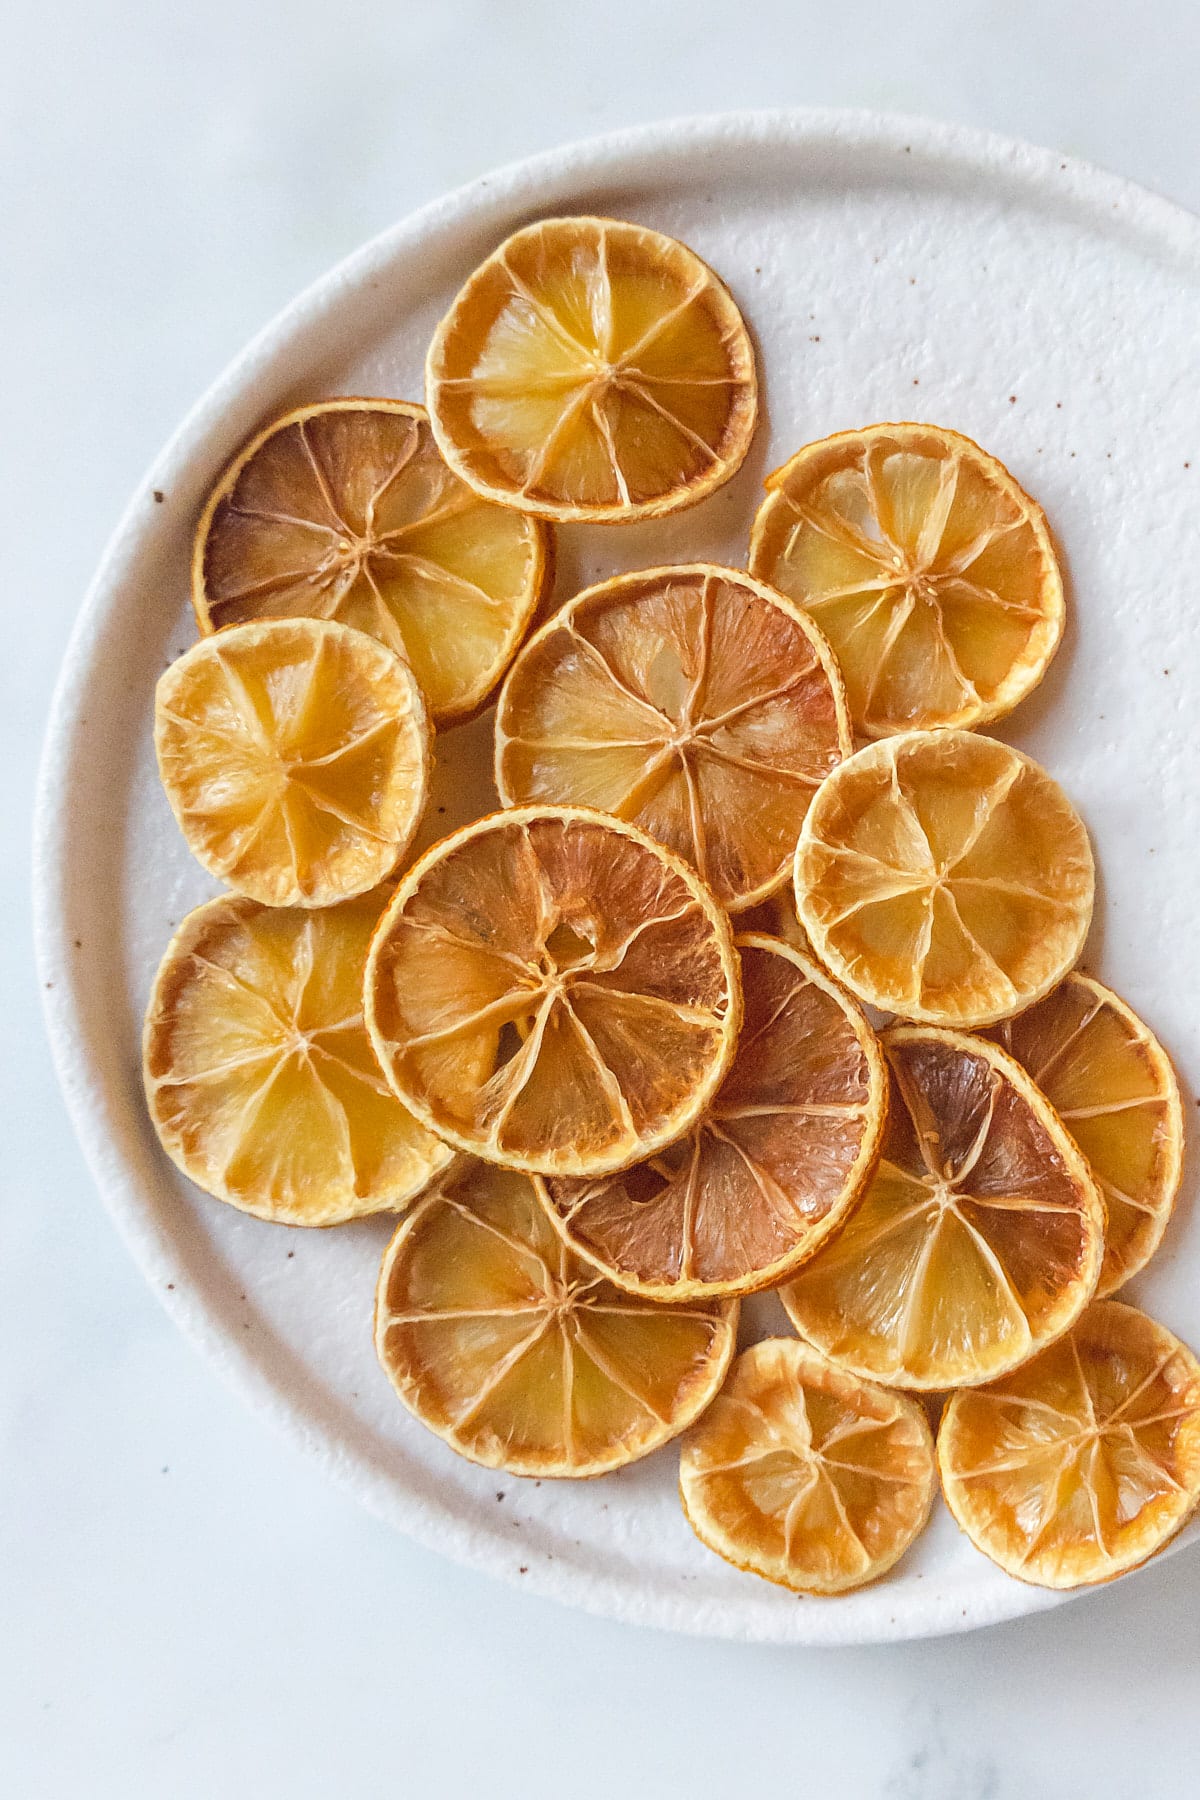 Homemade Dried Lemon Slices - From The Comfort Of My Bowl